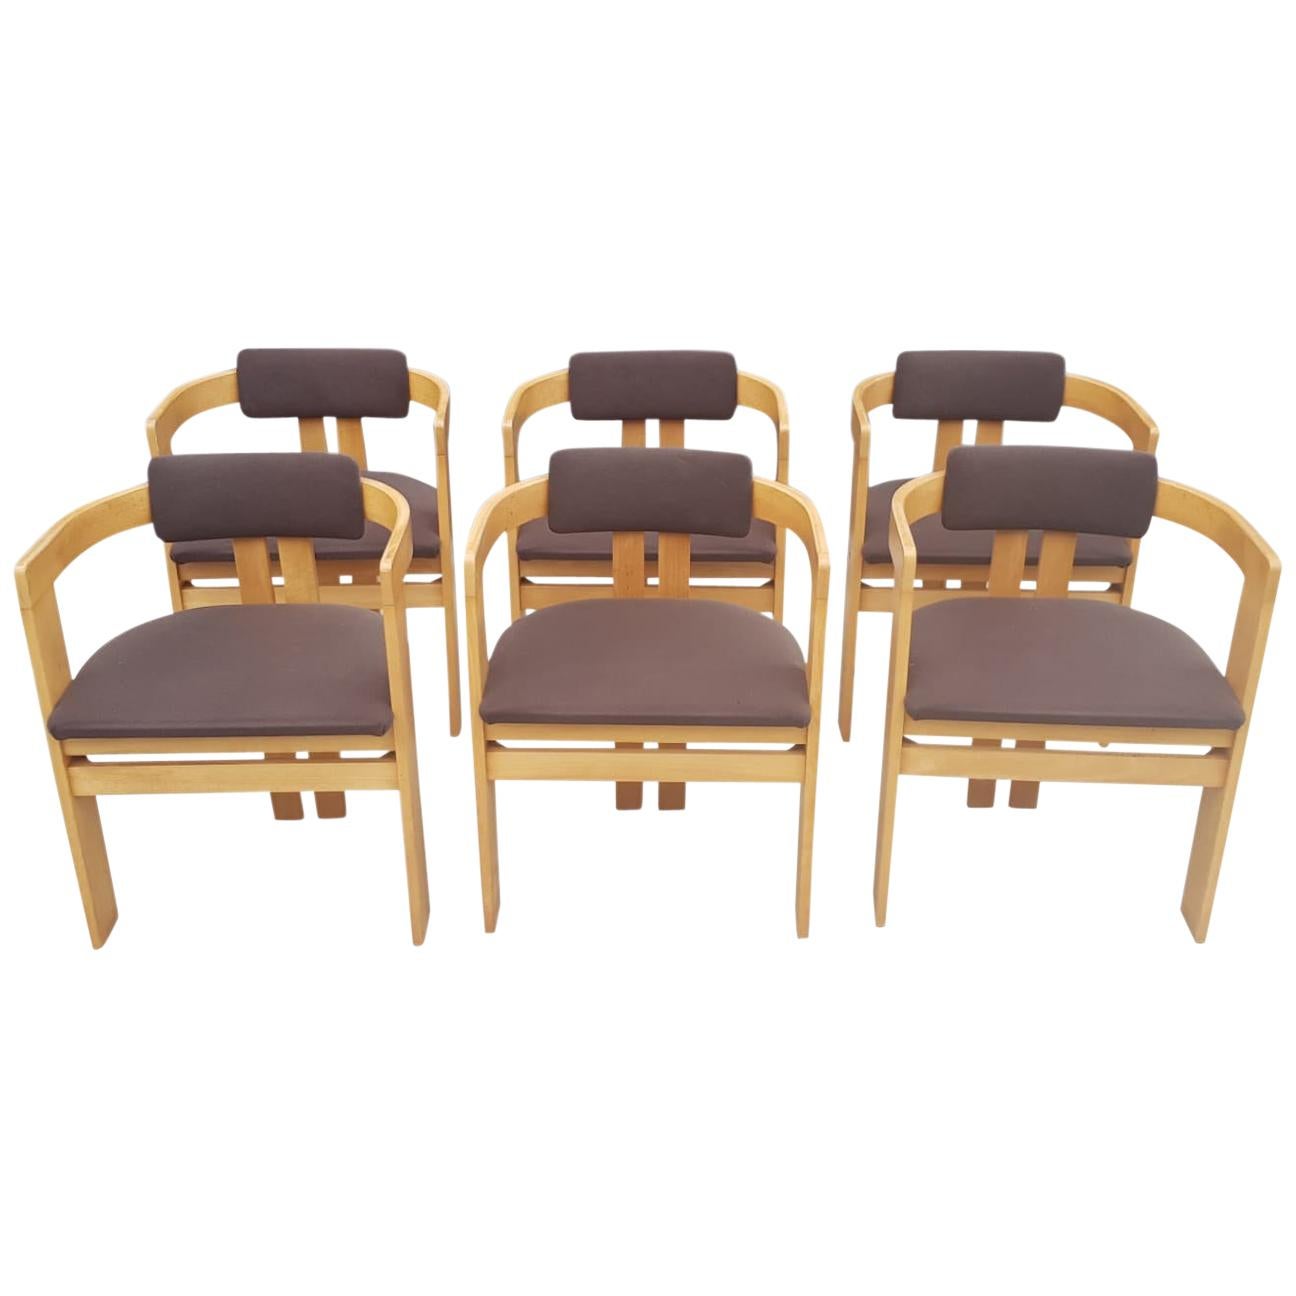 Tobia Scarpa Pigreco Dining Chairs, Set of 6, 1970s